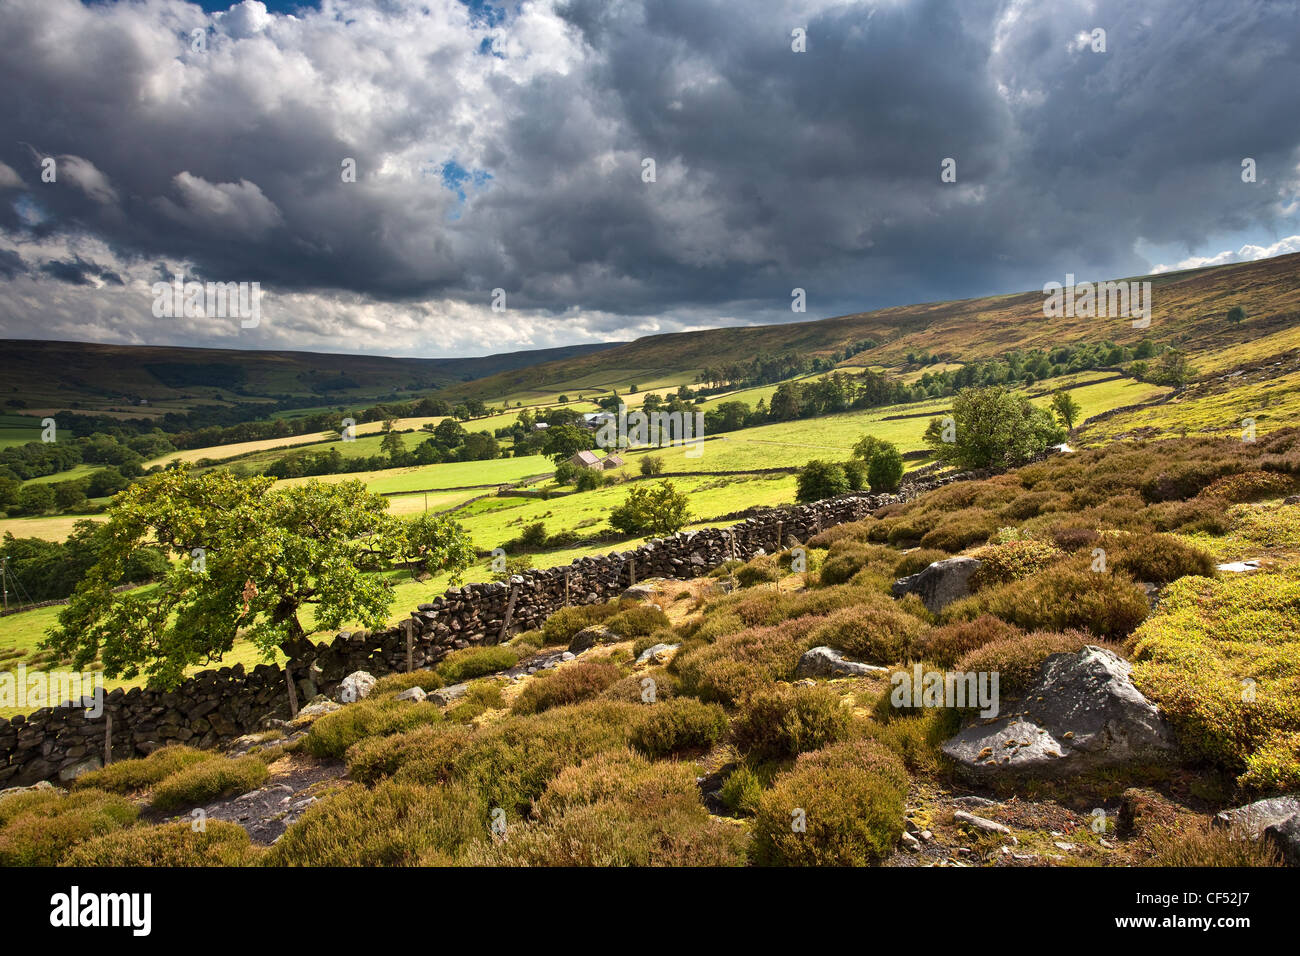 Nuvole scure su Westerdale nel North York Moors National Park. Foto Stock